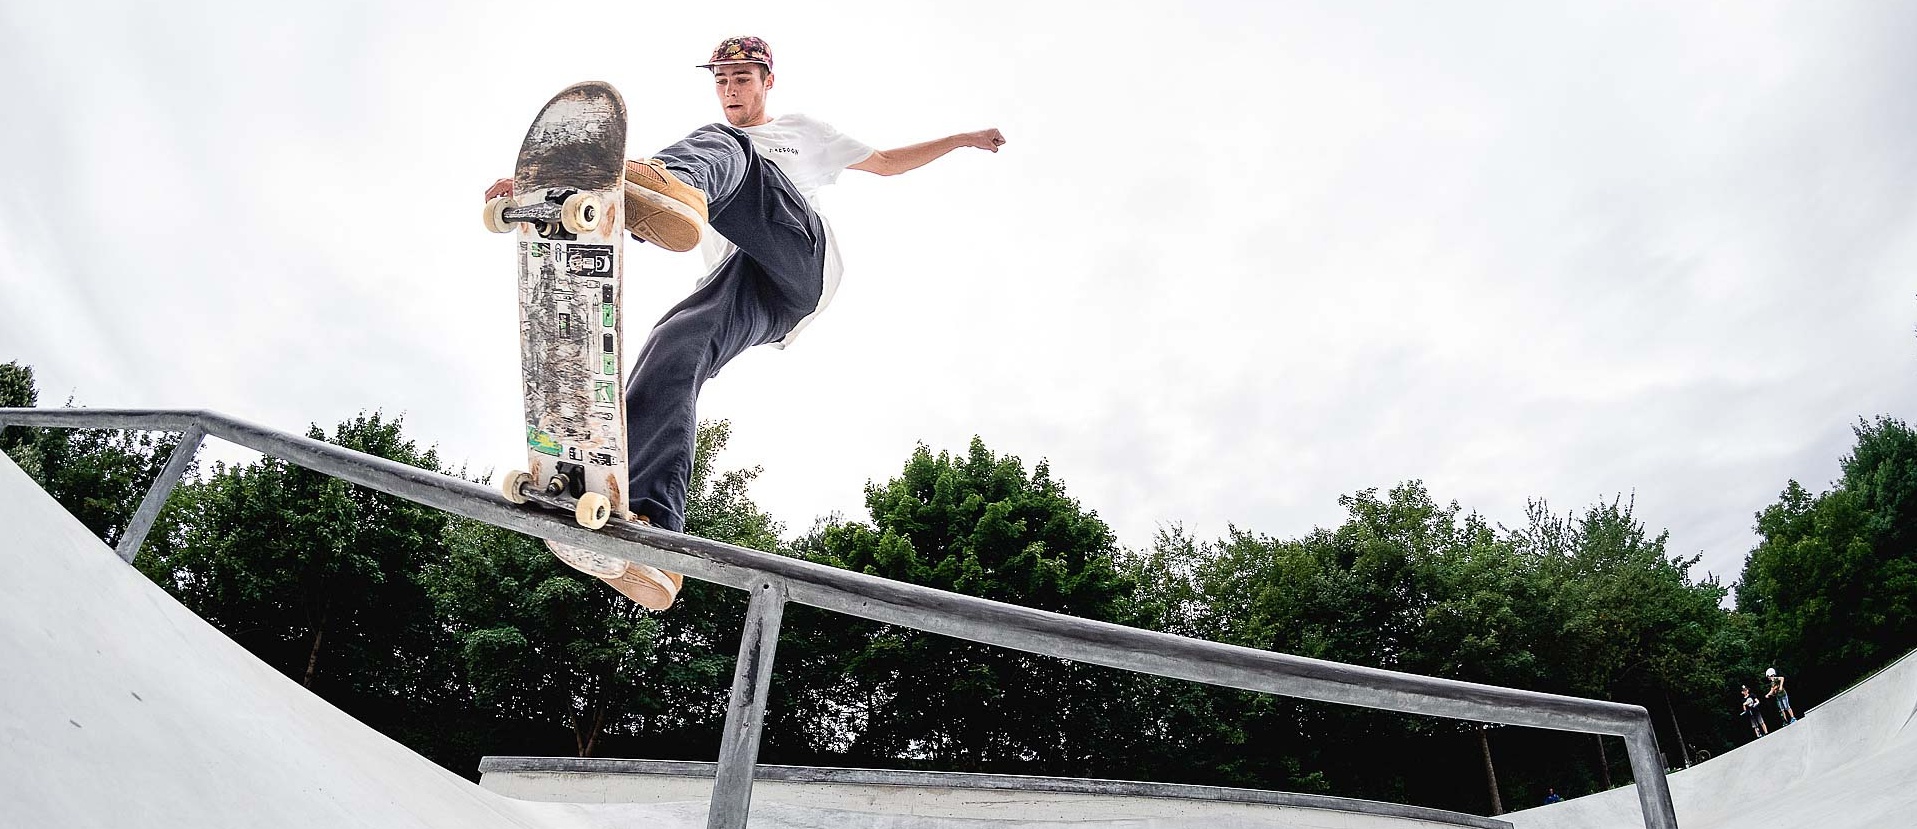 Skateboarder performing a trick on a rail in a skate park